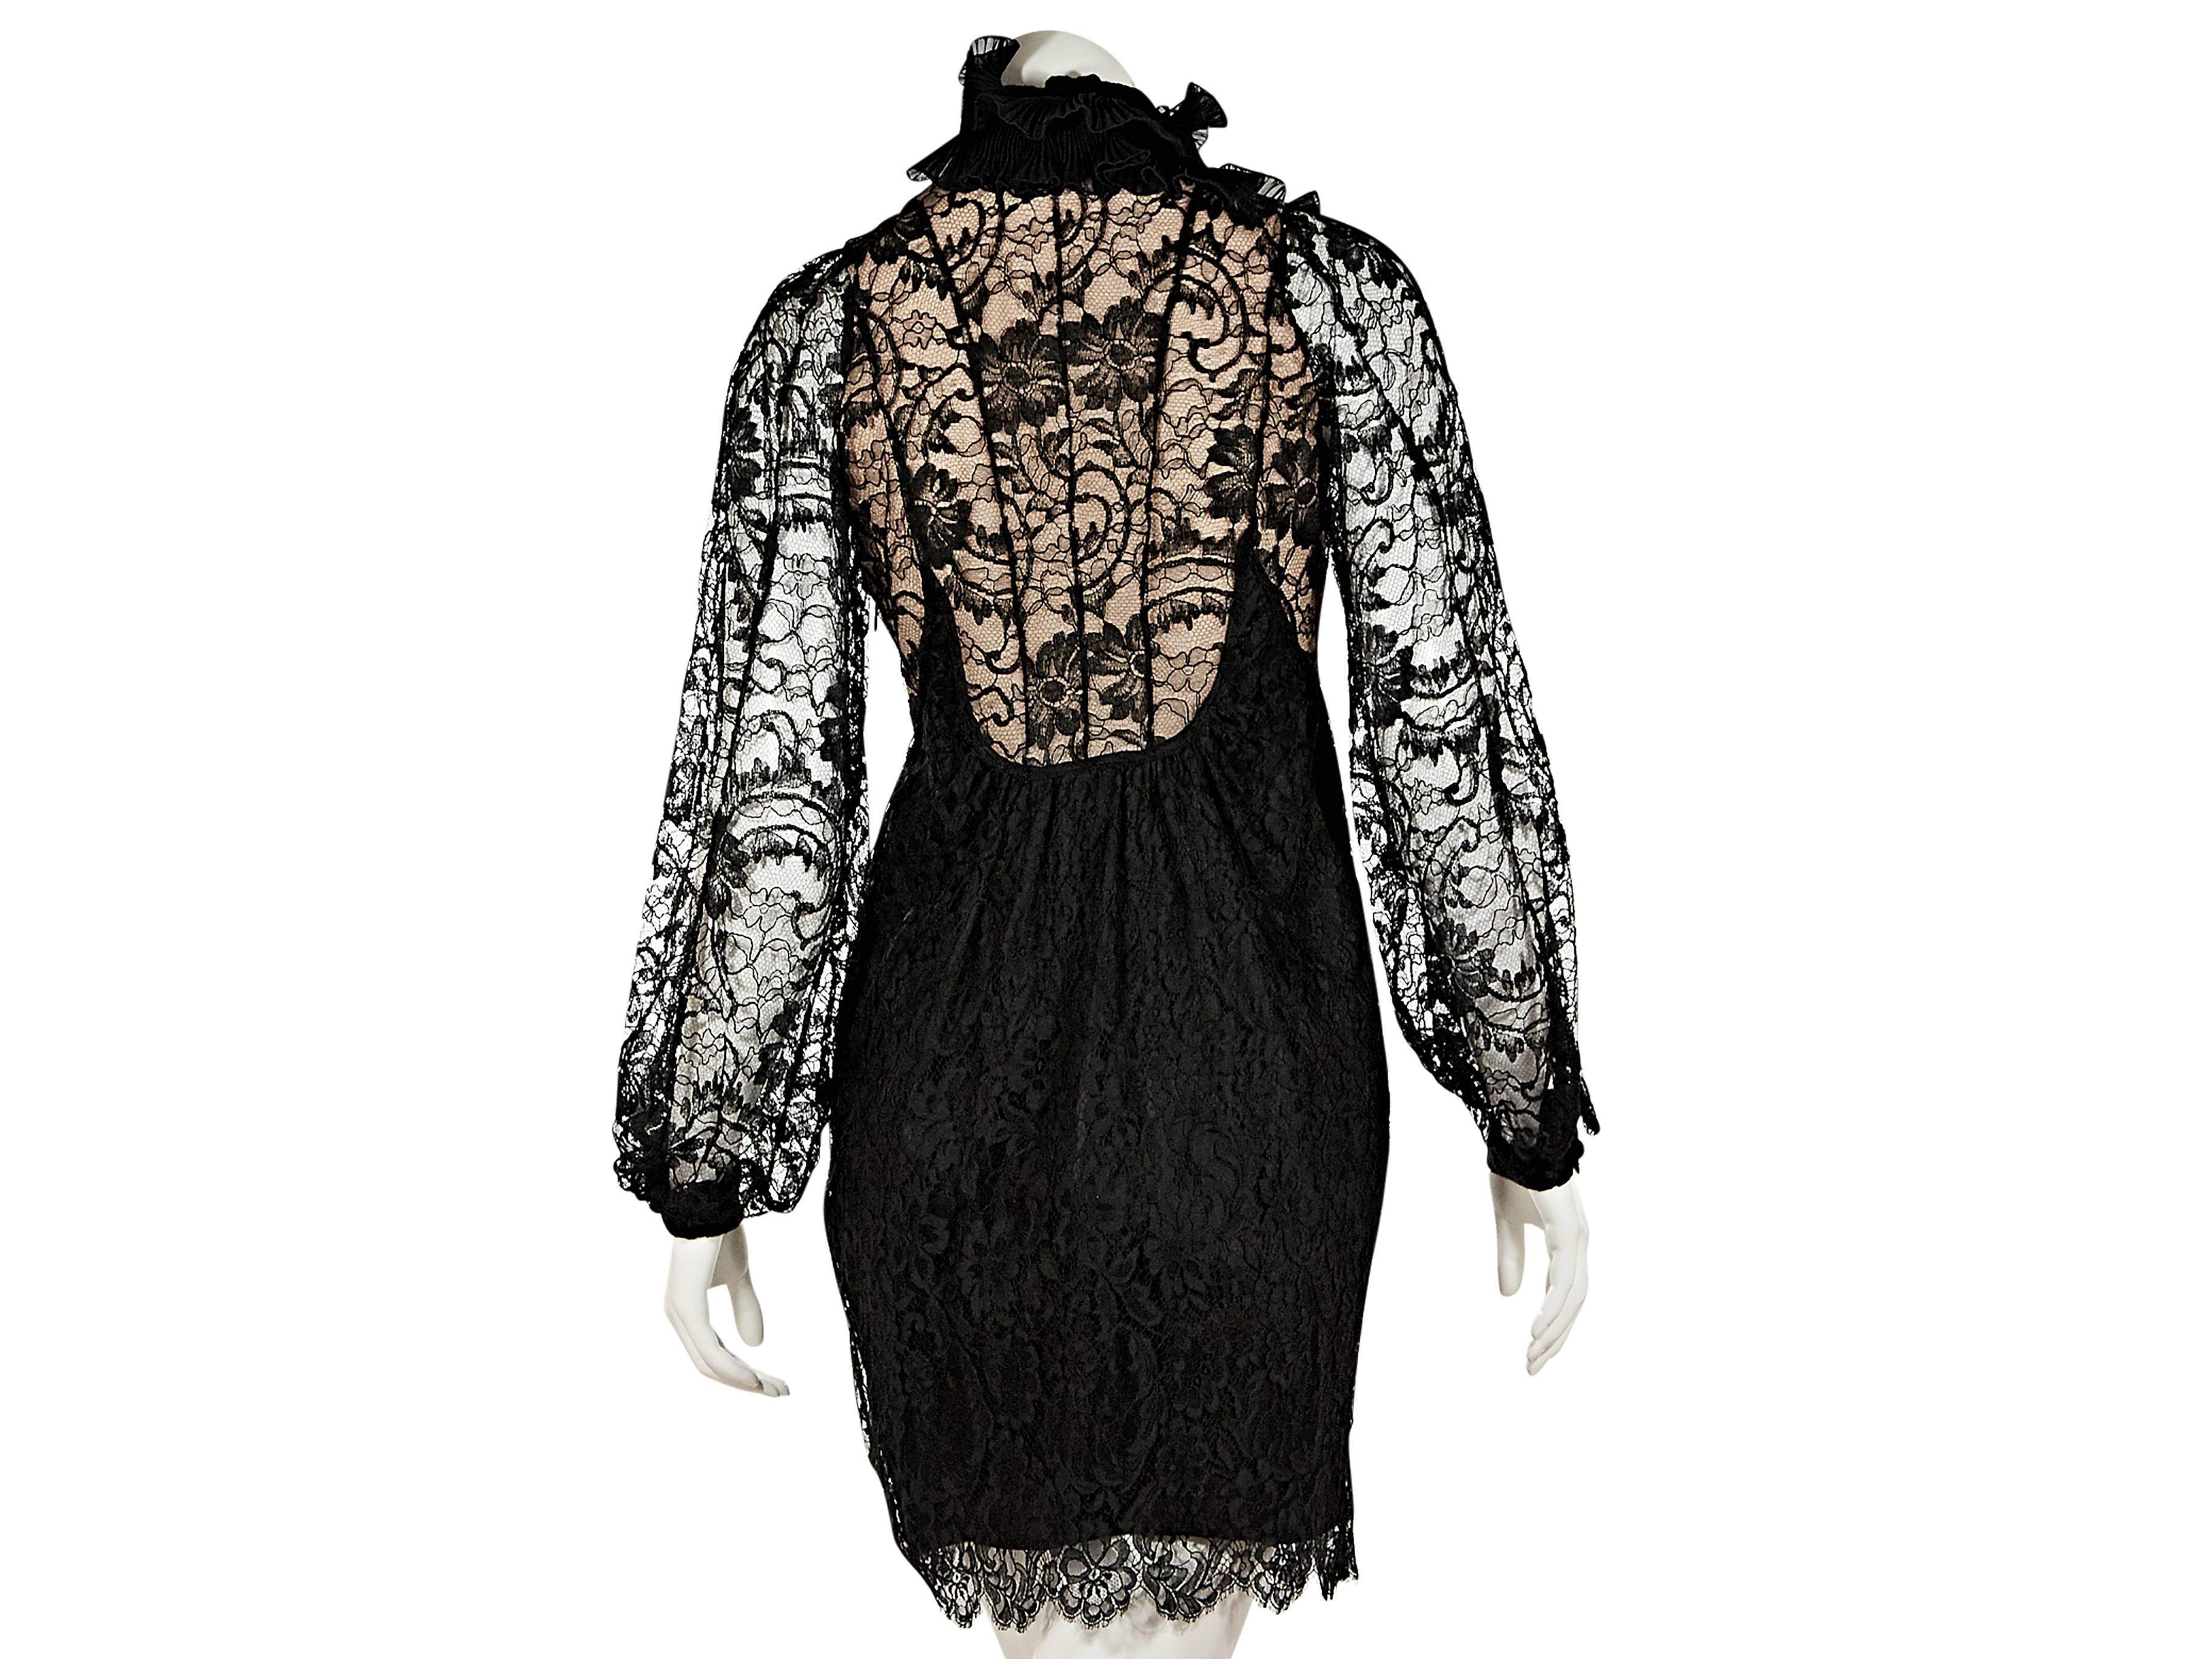 Black lace dress by Givenchy.  Stand collar.  Sheer lace long sleeves.  Ruffled bodice.  Concealed button-front placket.  Peek-a-boo lining.  Scalloped hem. 